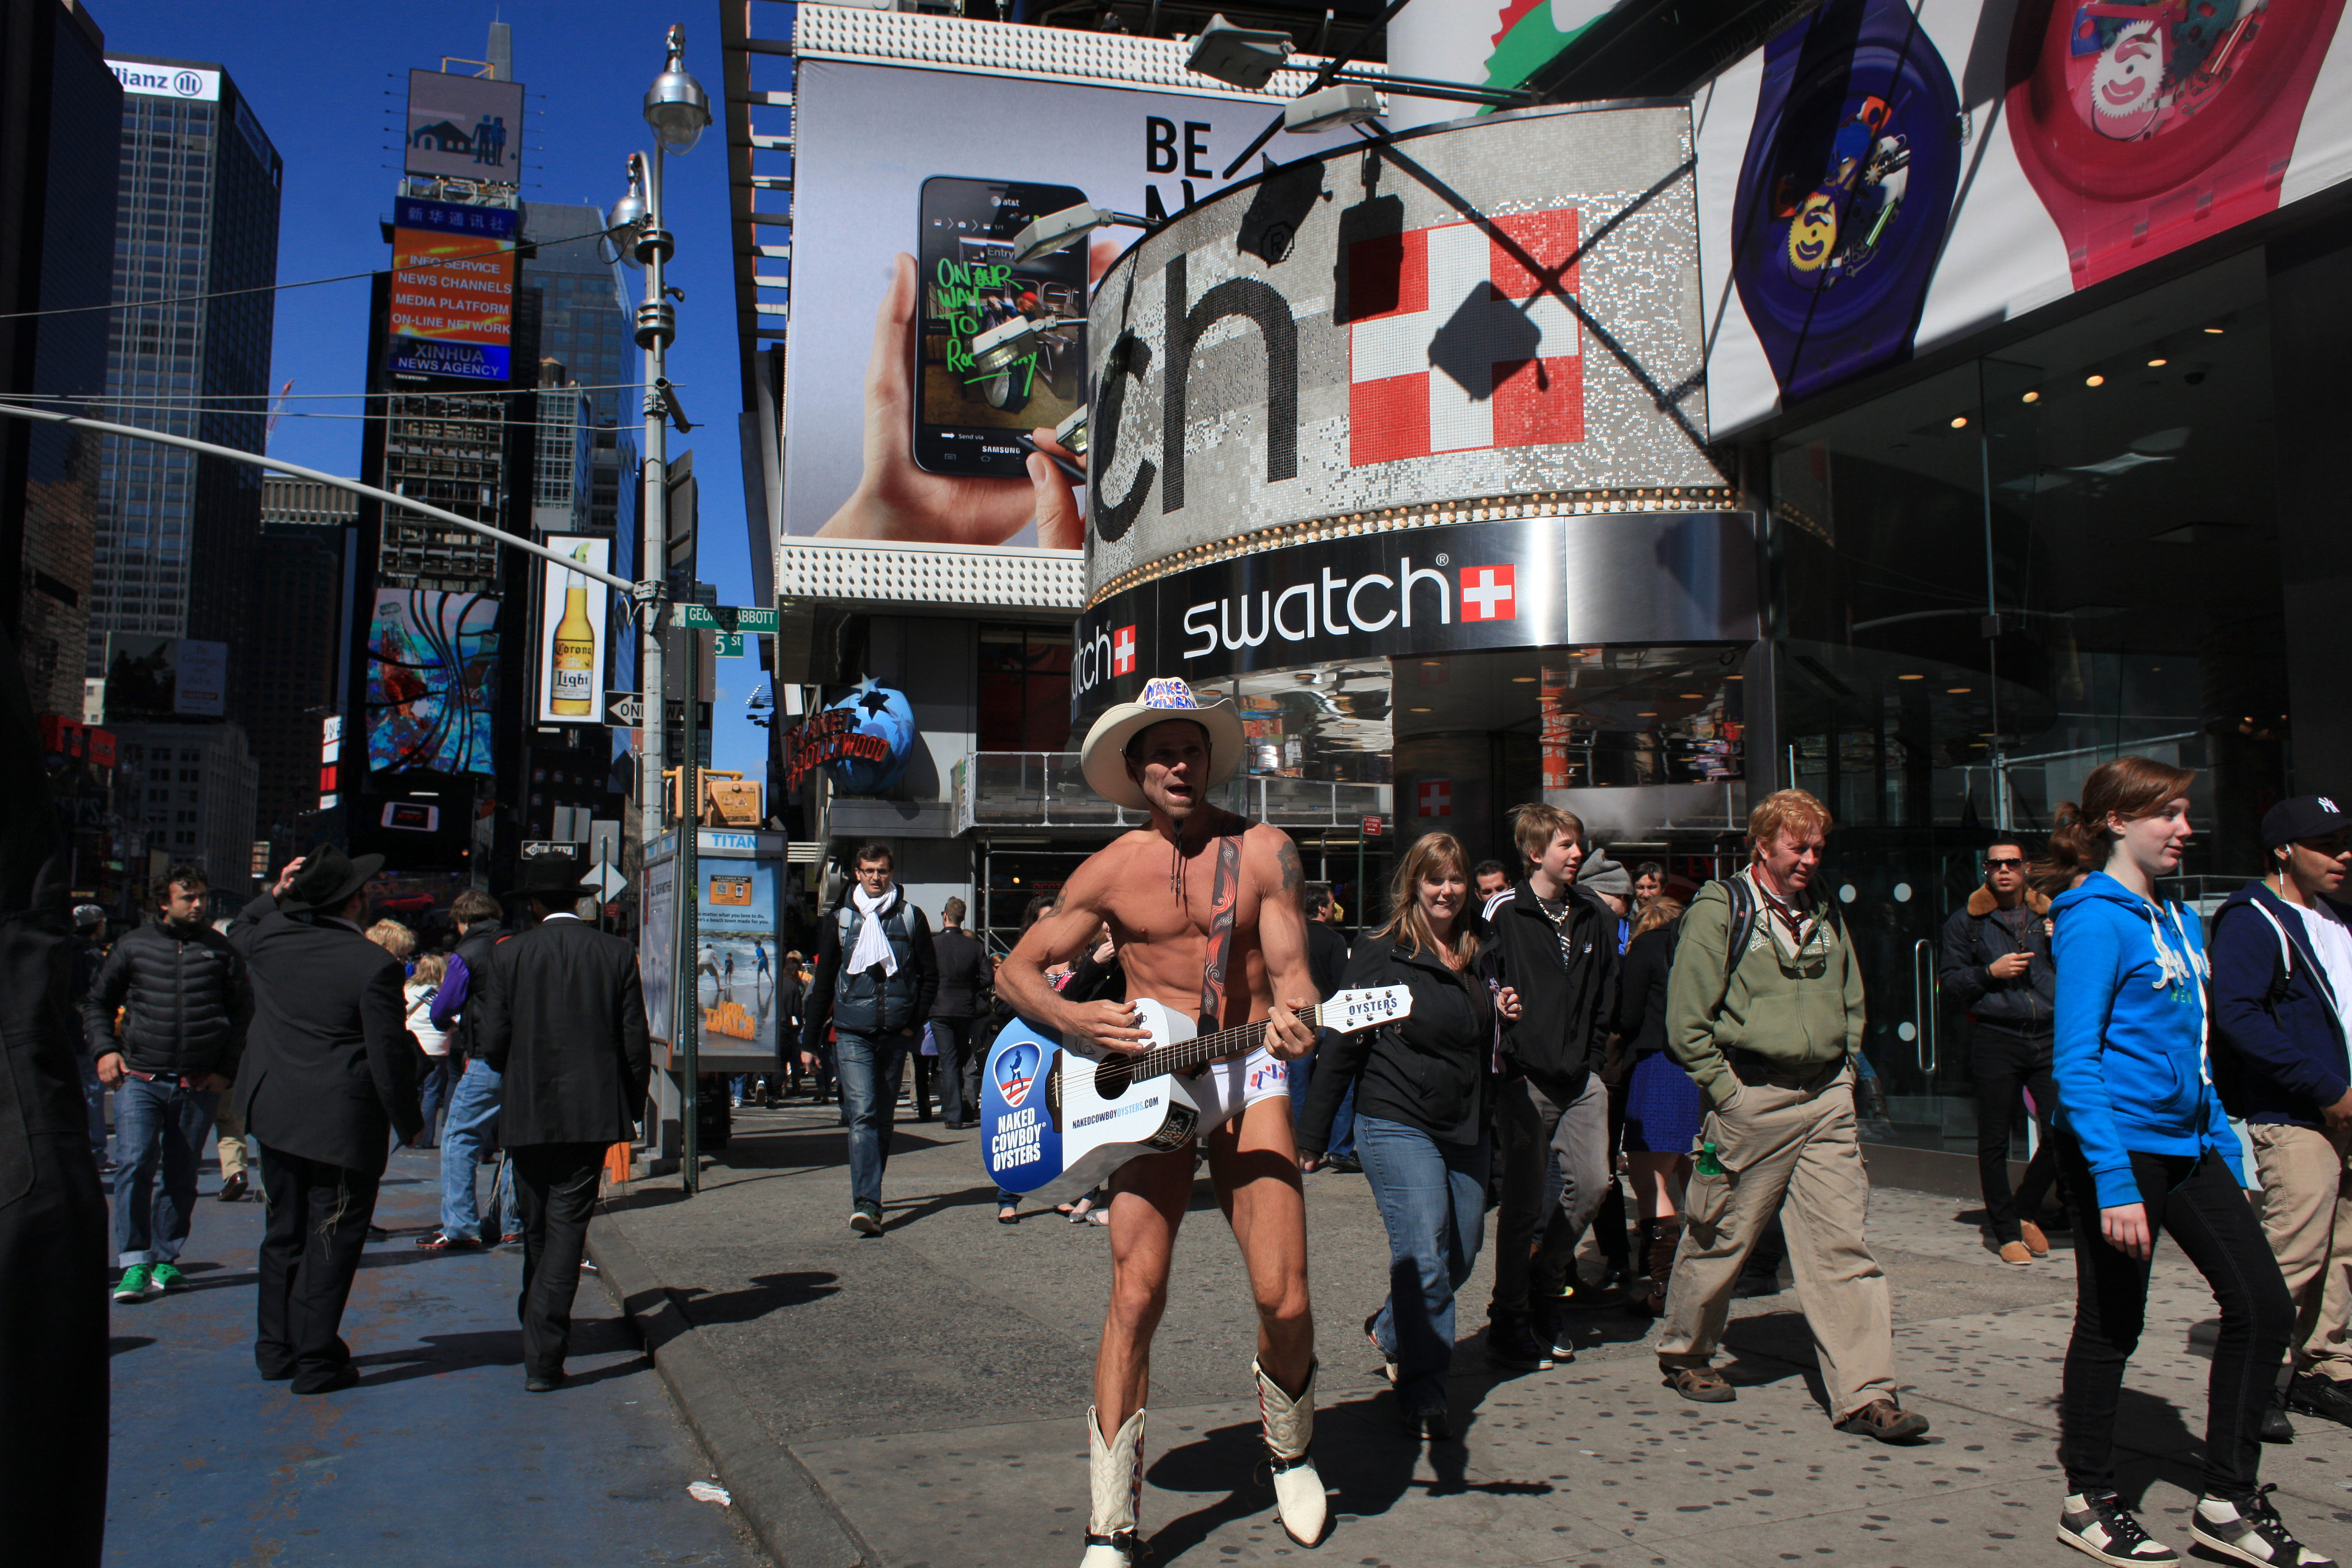 The Naked Cowboy performing in Time Square, New York. Times Square is the major commercial intersection in Midtown Manhattan, New York City. Time Square, New York, USA. 27th April 2012. Photo Tim Clayton (Photo by Tim Clayton/Corbis via Getty Images)